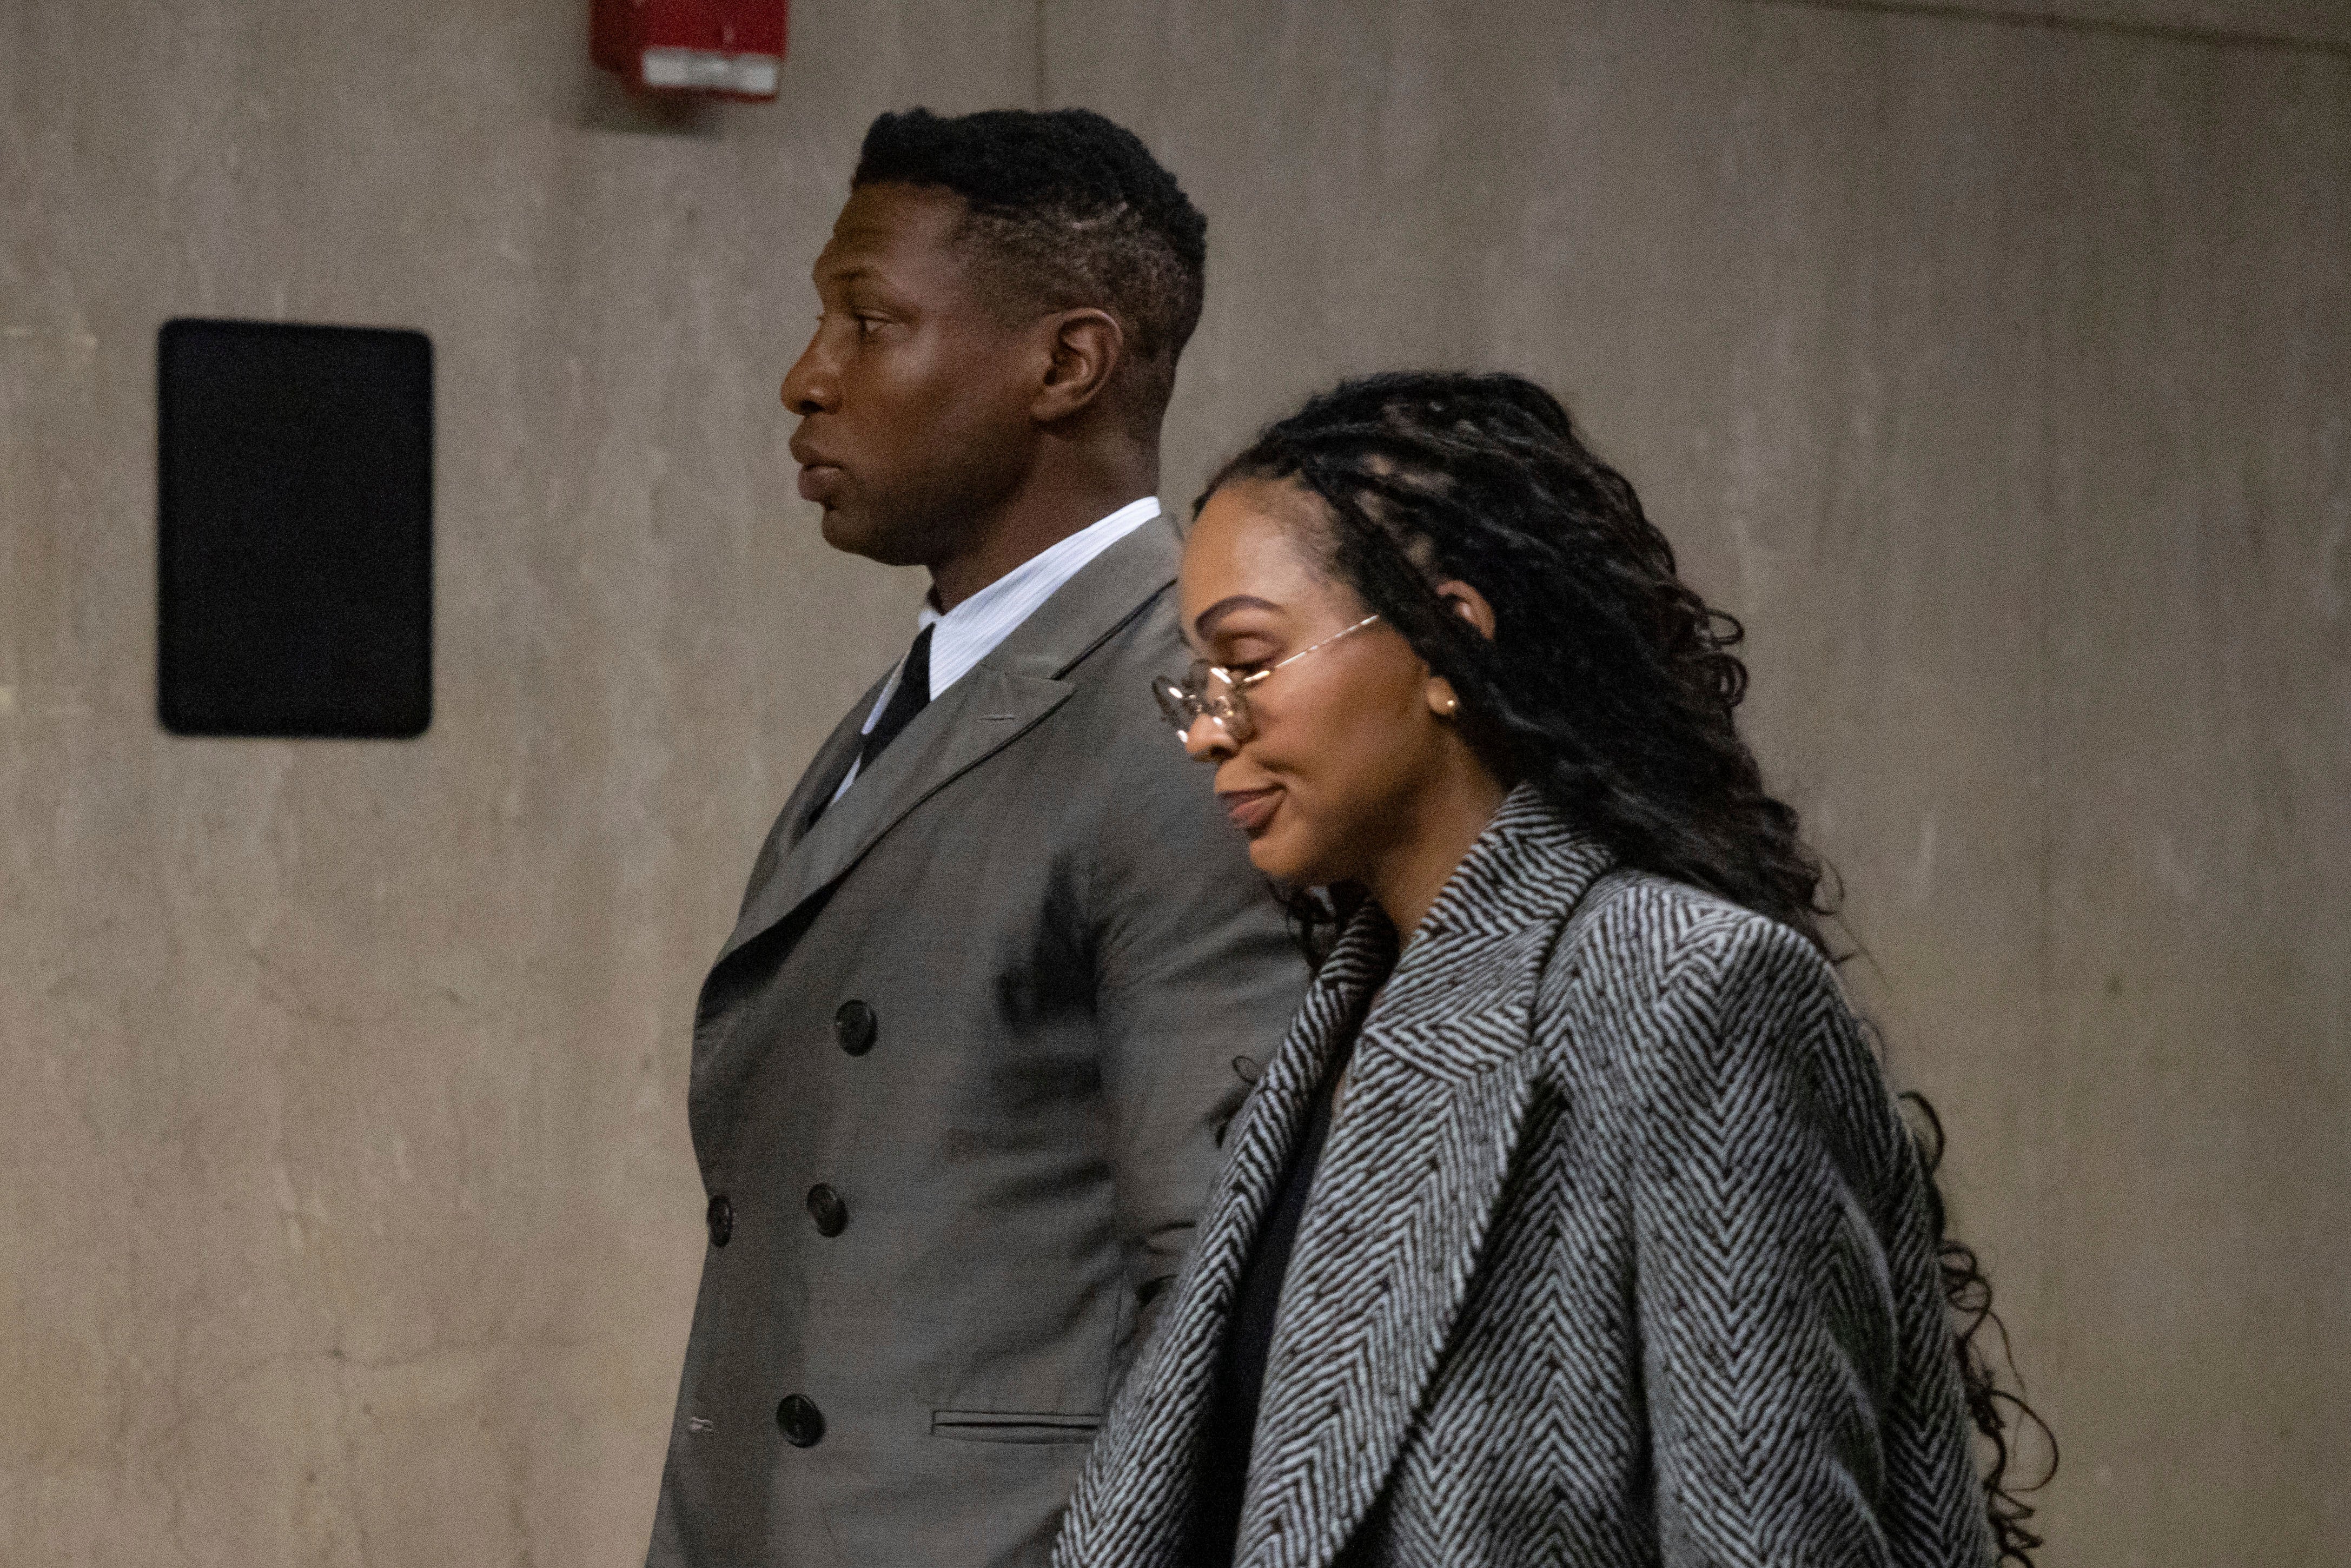 <p>Actor Jonathan Majors and Meagan Good exit a courtroom during a break in jury selection in his domestic violence case, Wednesday, Nov. 29, 2023, in New York. (AP Photo/Yuki Iwamura)</p>